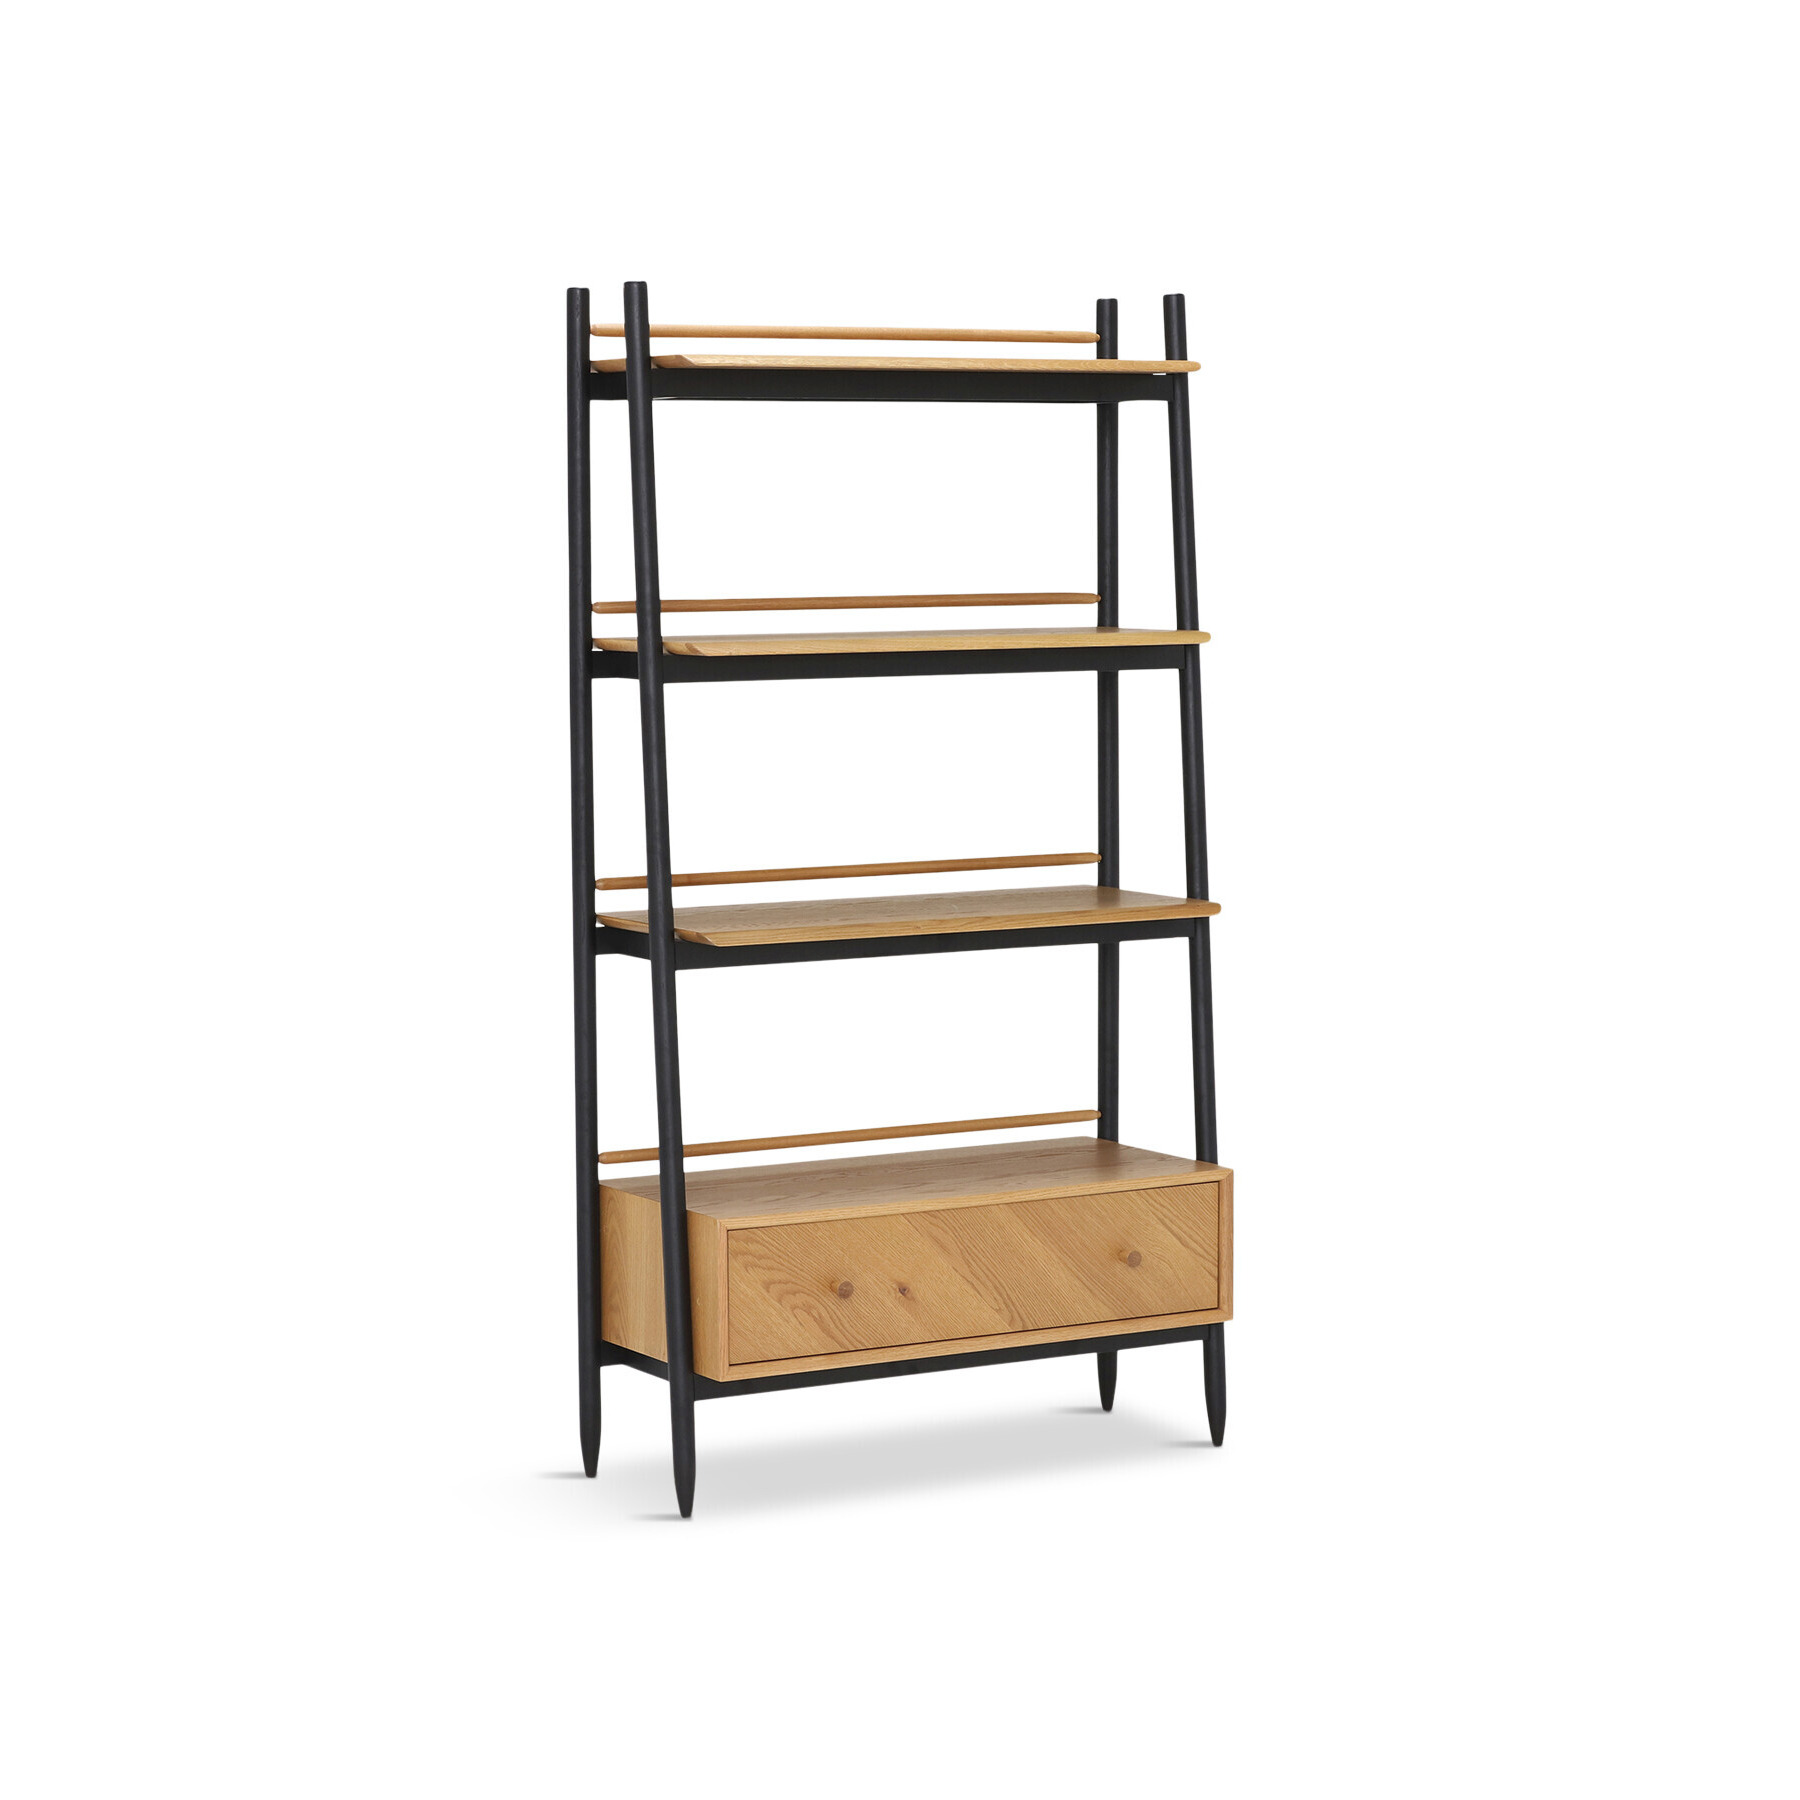 Barker and Stonehouse Ercol Monza Neutral Oak Tall Shelving Unit - image 1